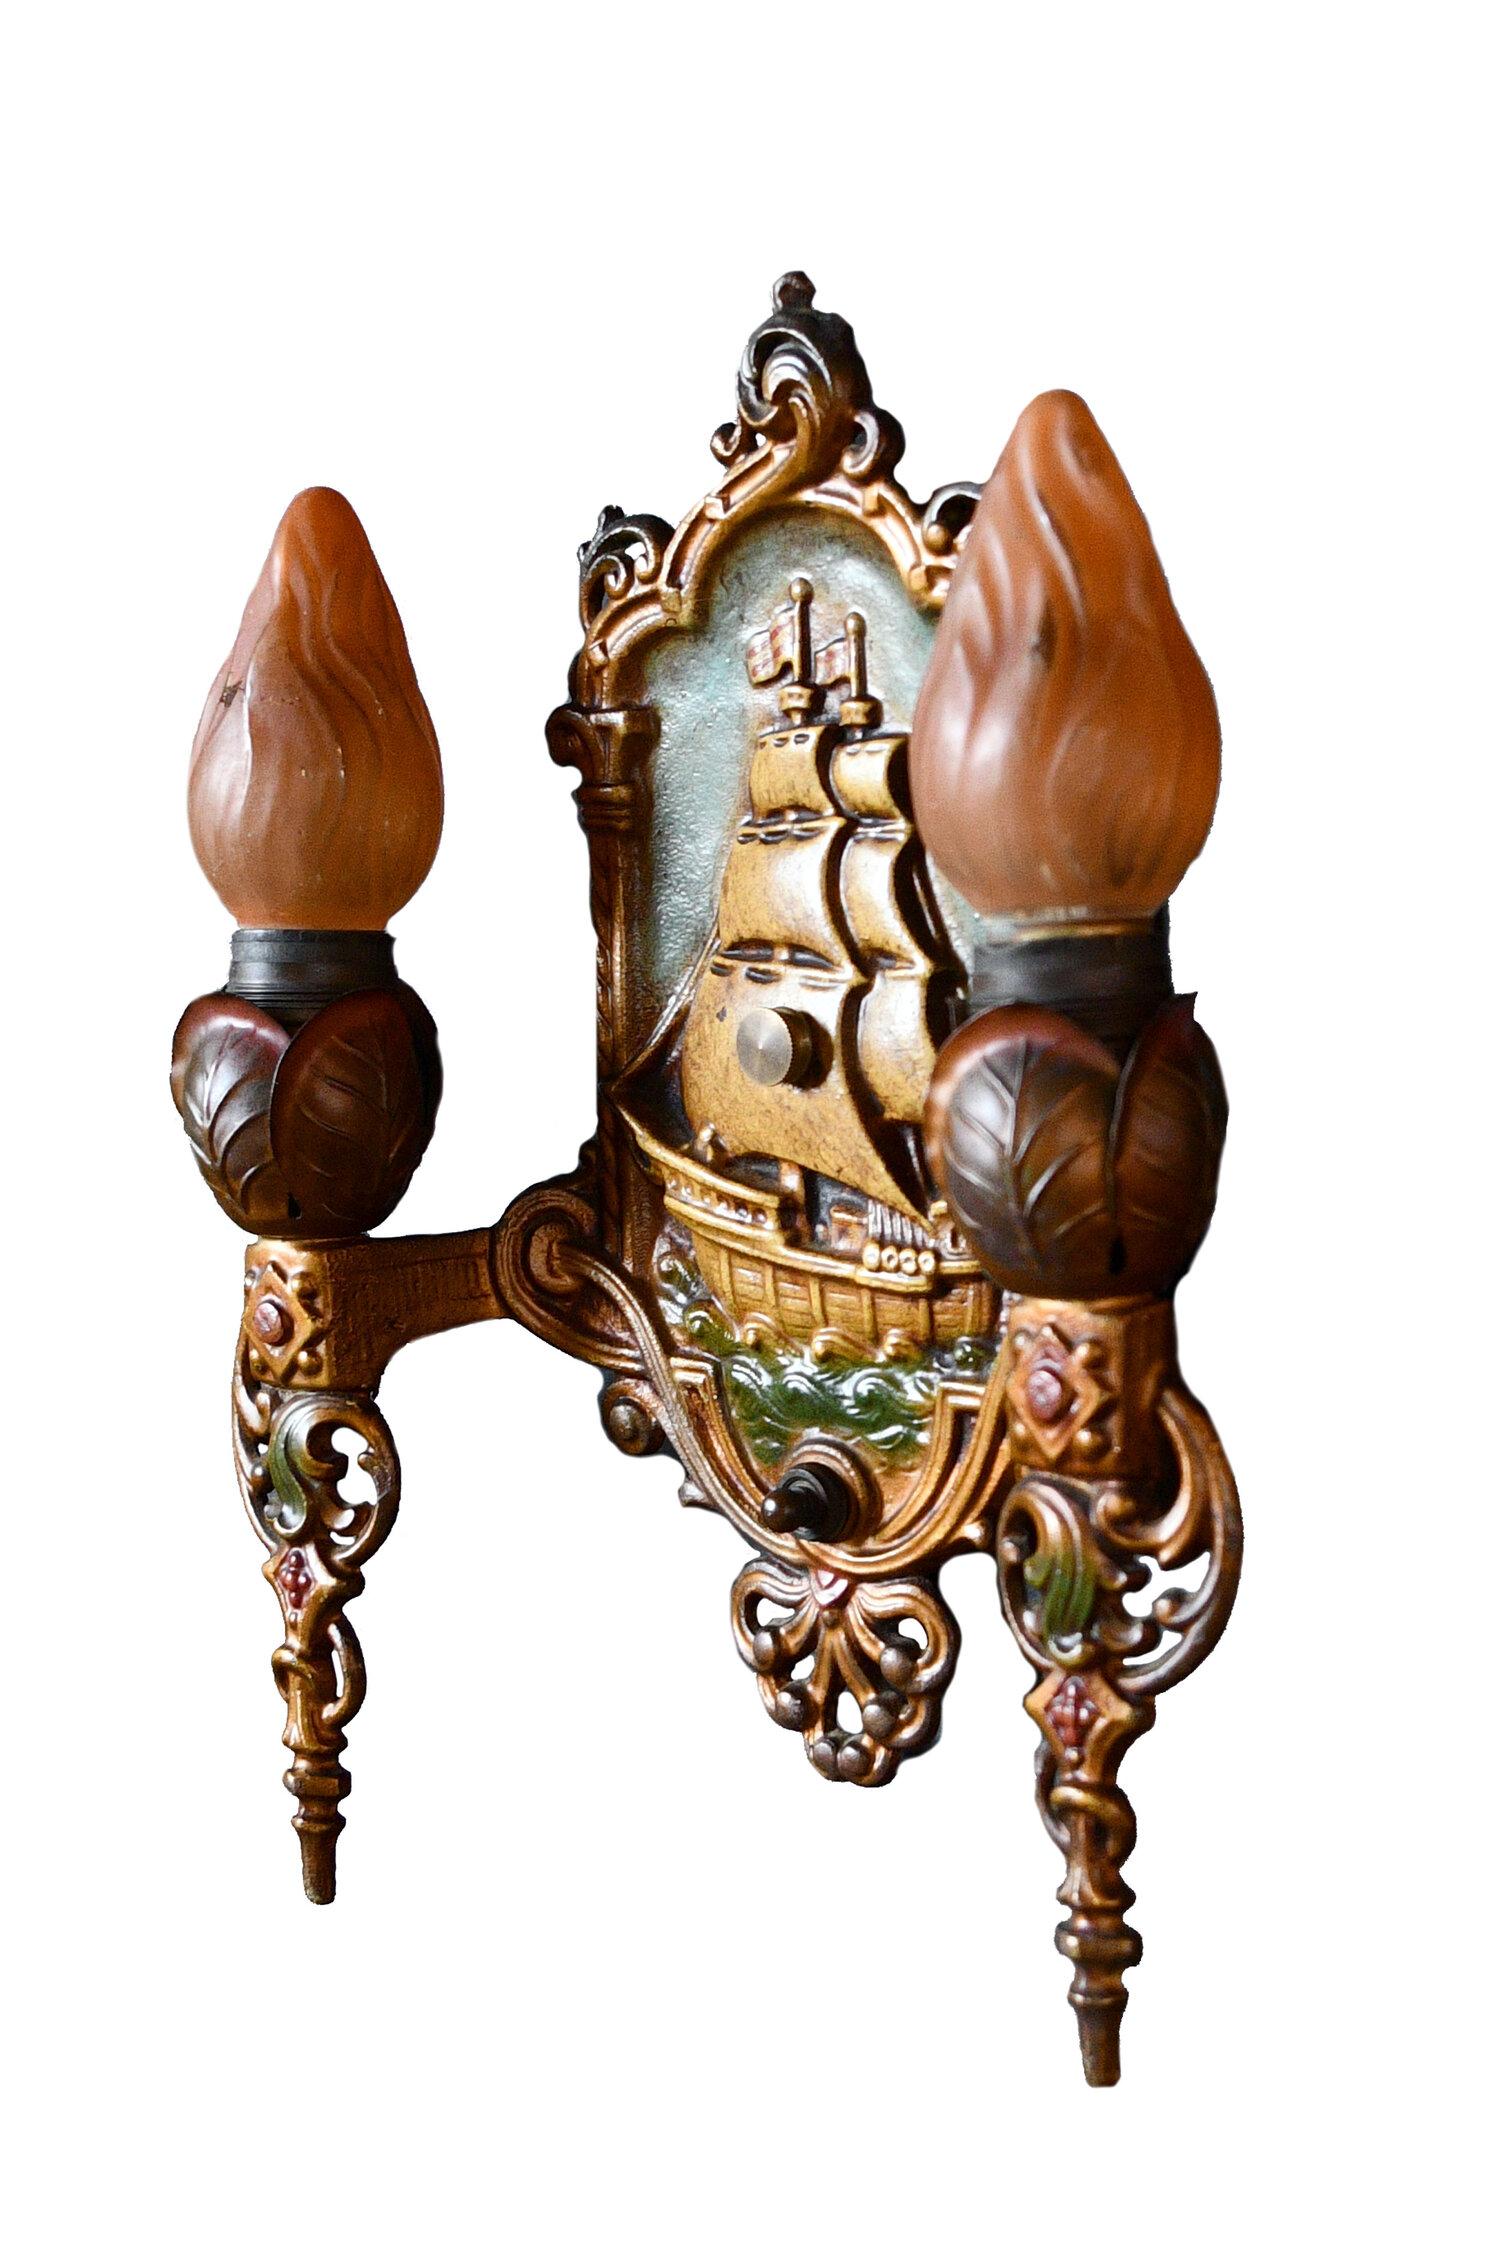 These sconces are in amazing condition for their age and will be a statement piece to any living space. A large central ship on the backplate is set in an ornate gold frame. The base of the body has a turn switch and fanning out from it many